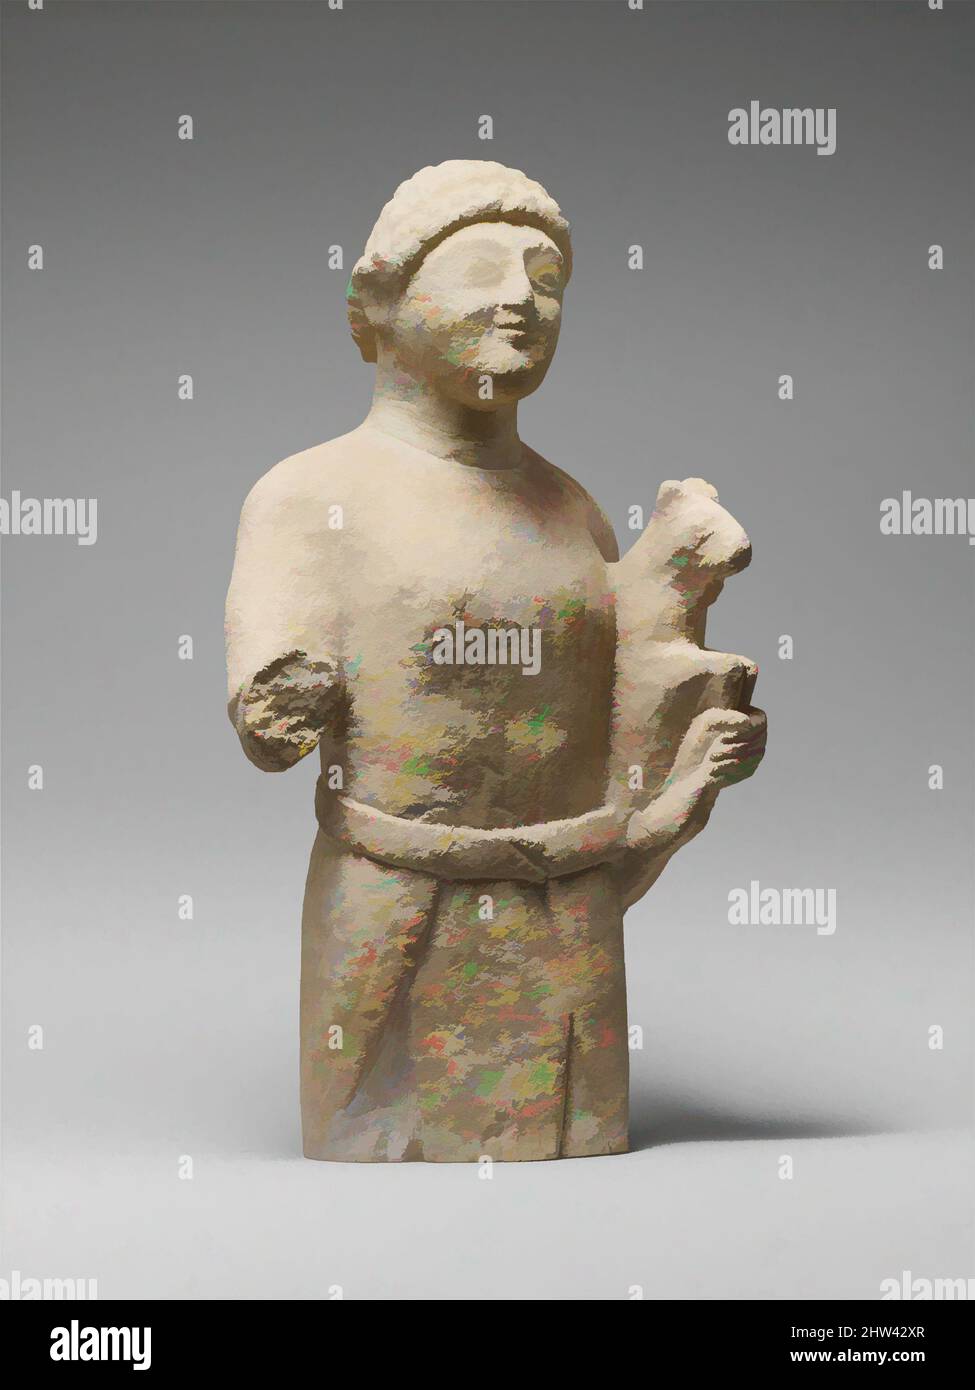 Art inspired by Limestone statuette of a male votary (worshipper), Archaic, mid-6th century B.C., Cypriot, Limestone, H.: 10 1/2 x 5 1/2 x 3 1/2 in. (26.7 x 14 x 8.9 cm), Stone Sculpture, The figure wears an Egyptian kilt and a tunic with half-length sleeves. He is holding a small goat, Classic works modernized by Artotop with a splash of modernity. Shapes, color and value, eye-catching visual impact on art. Emotions through freedom of artworks in a contemporary way. A timeless message pursuing a wildly creative new direction. Artists turning to the digital medium and creating the Artotop NFT Stock Photo